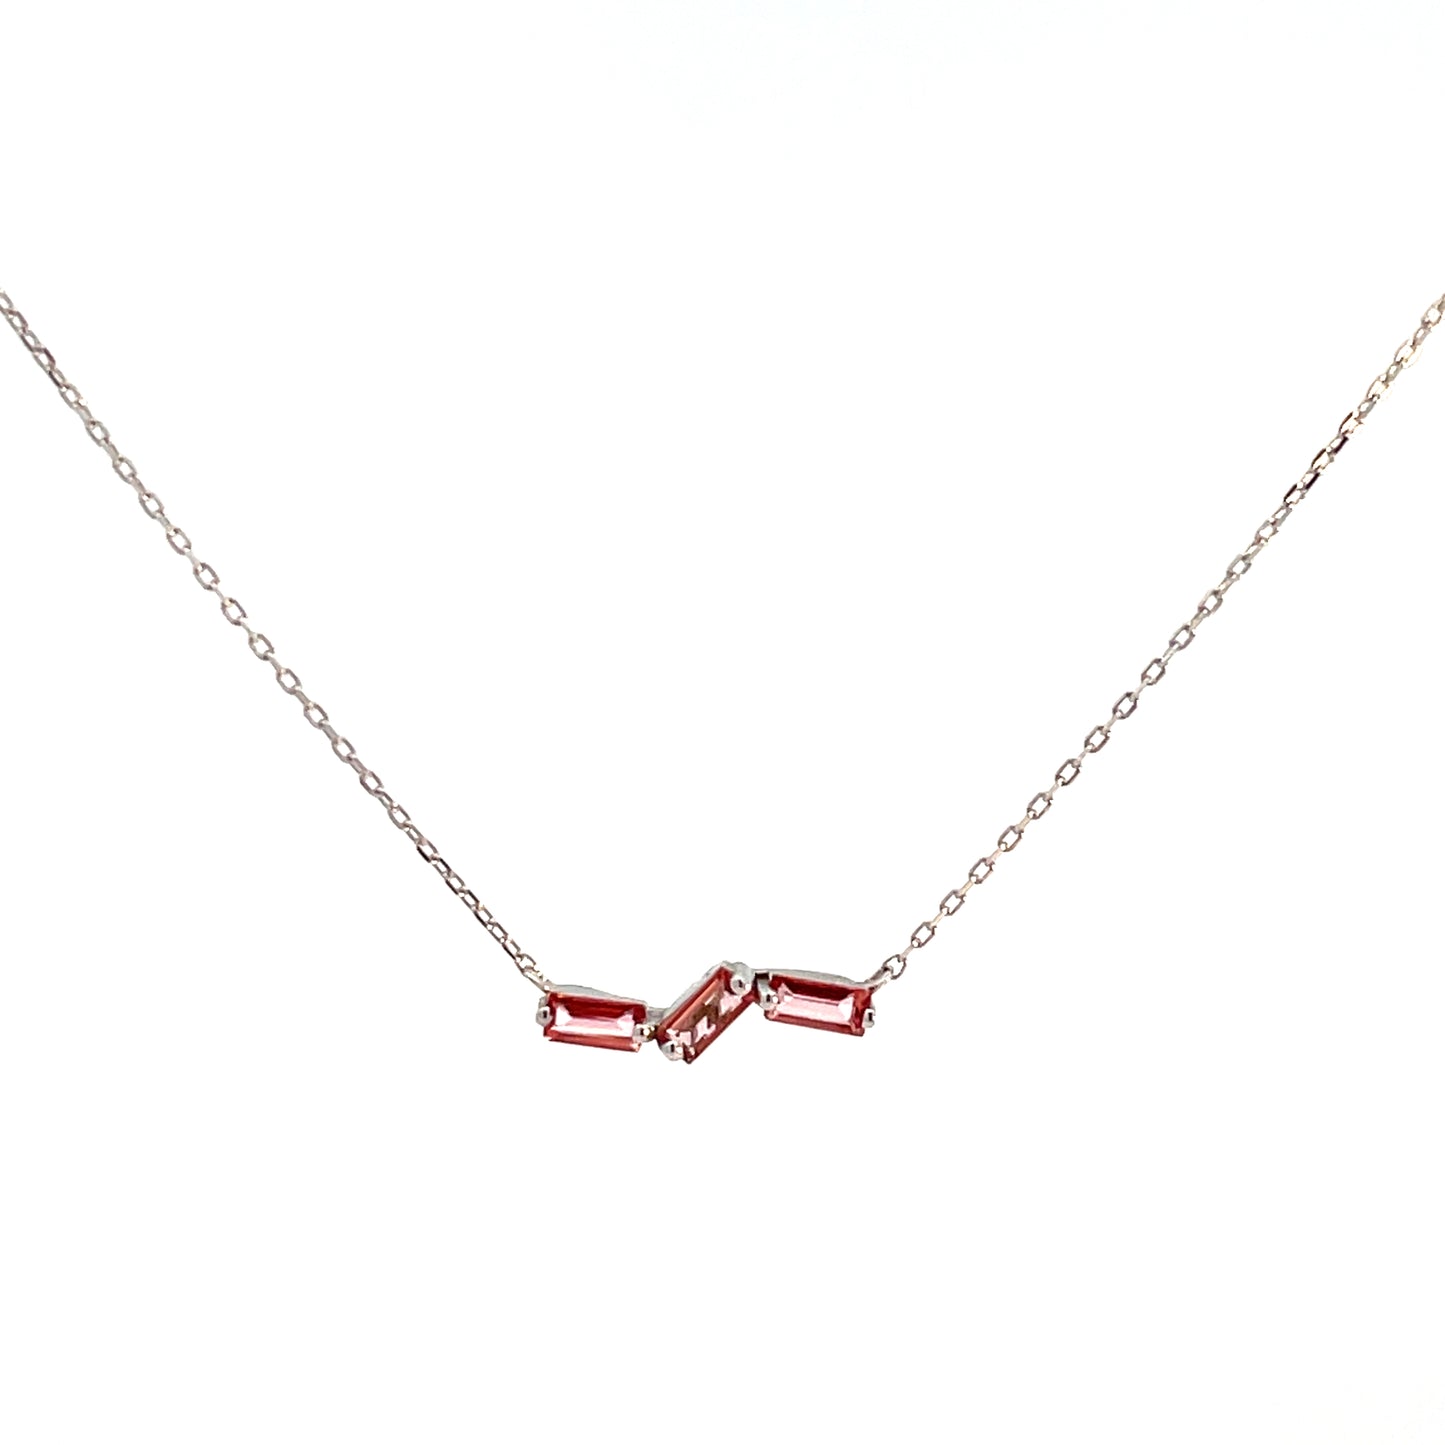 Three Baguette Necklace